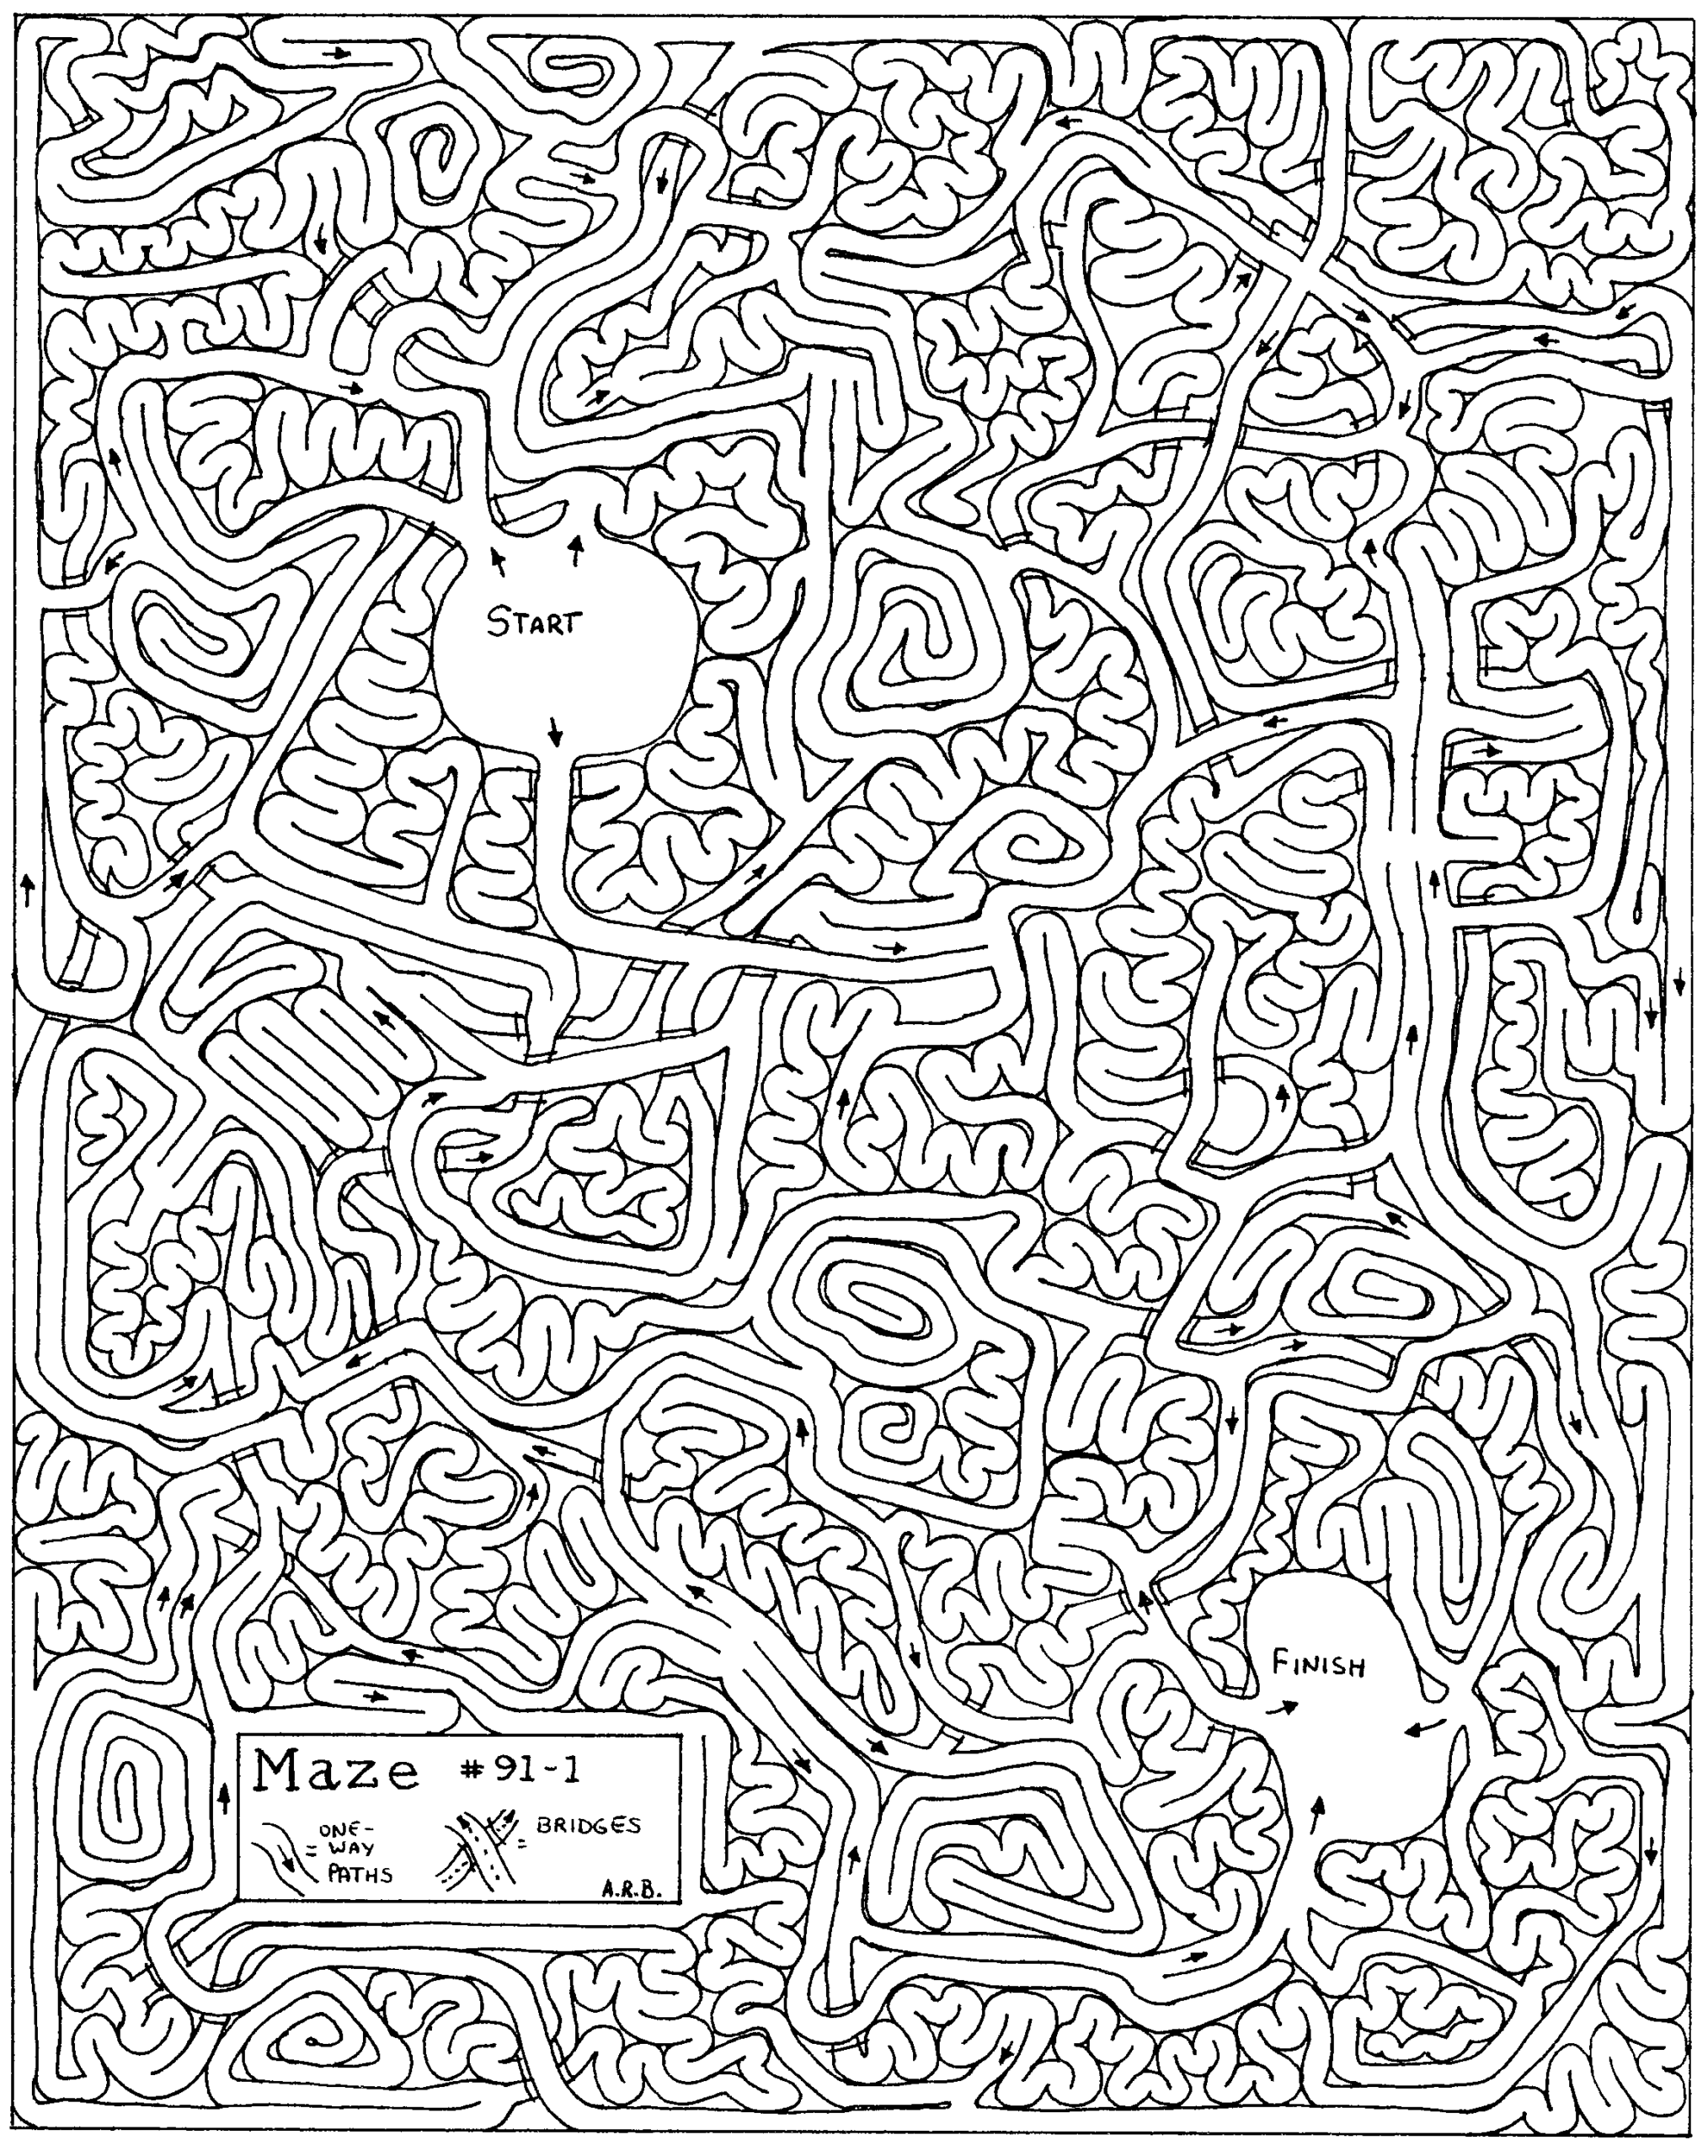 Puzzle Coloring Pages Hard Maze Puzzles Printable 2021 4957 Coloring4free